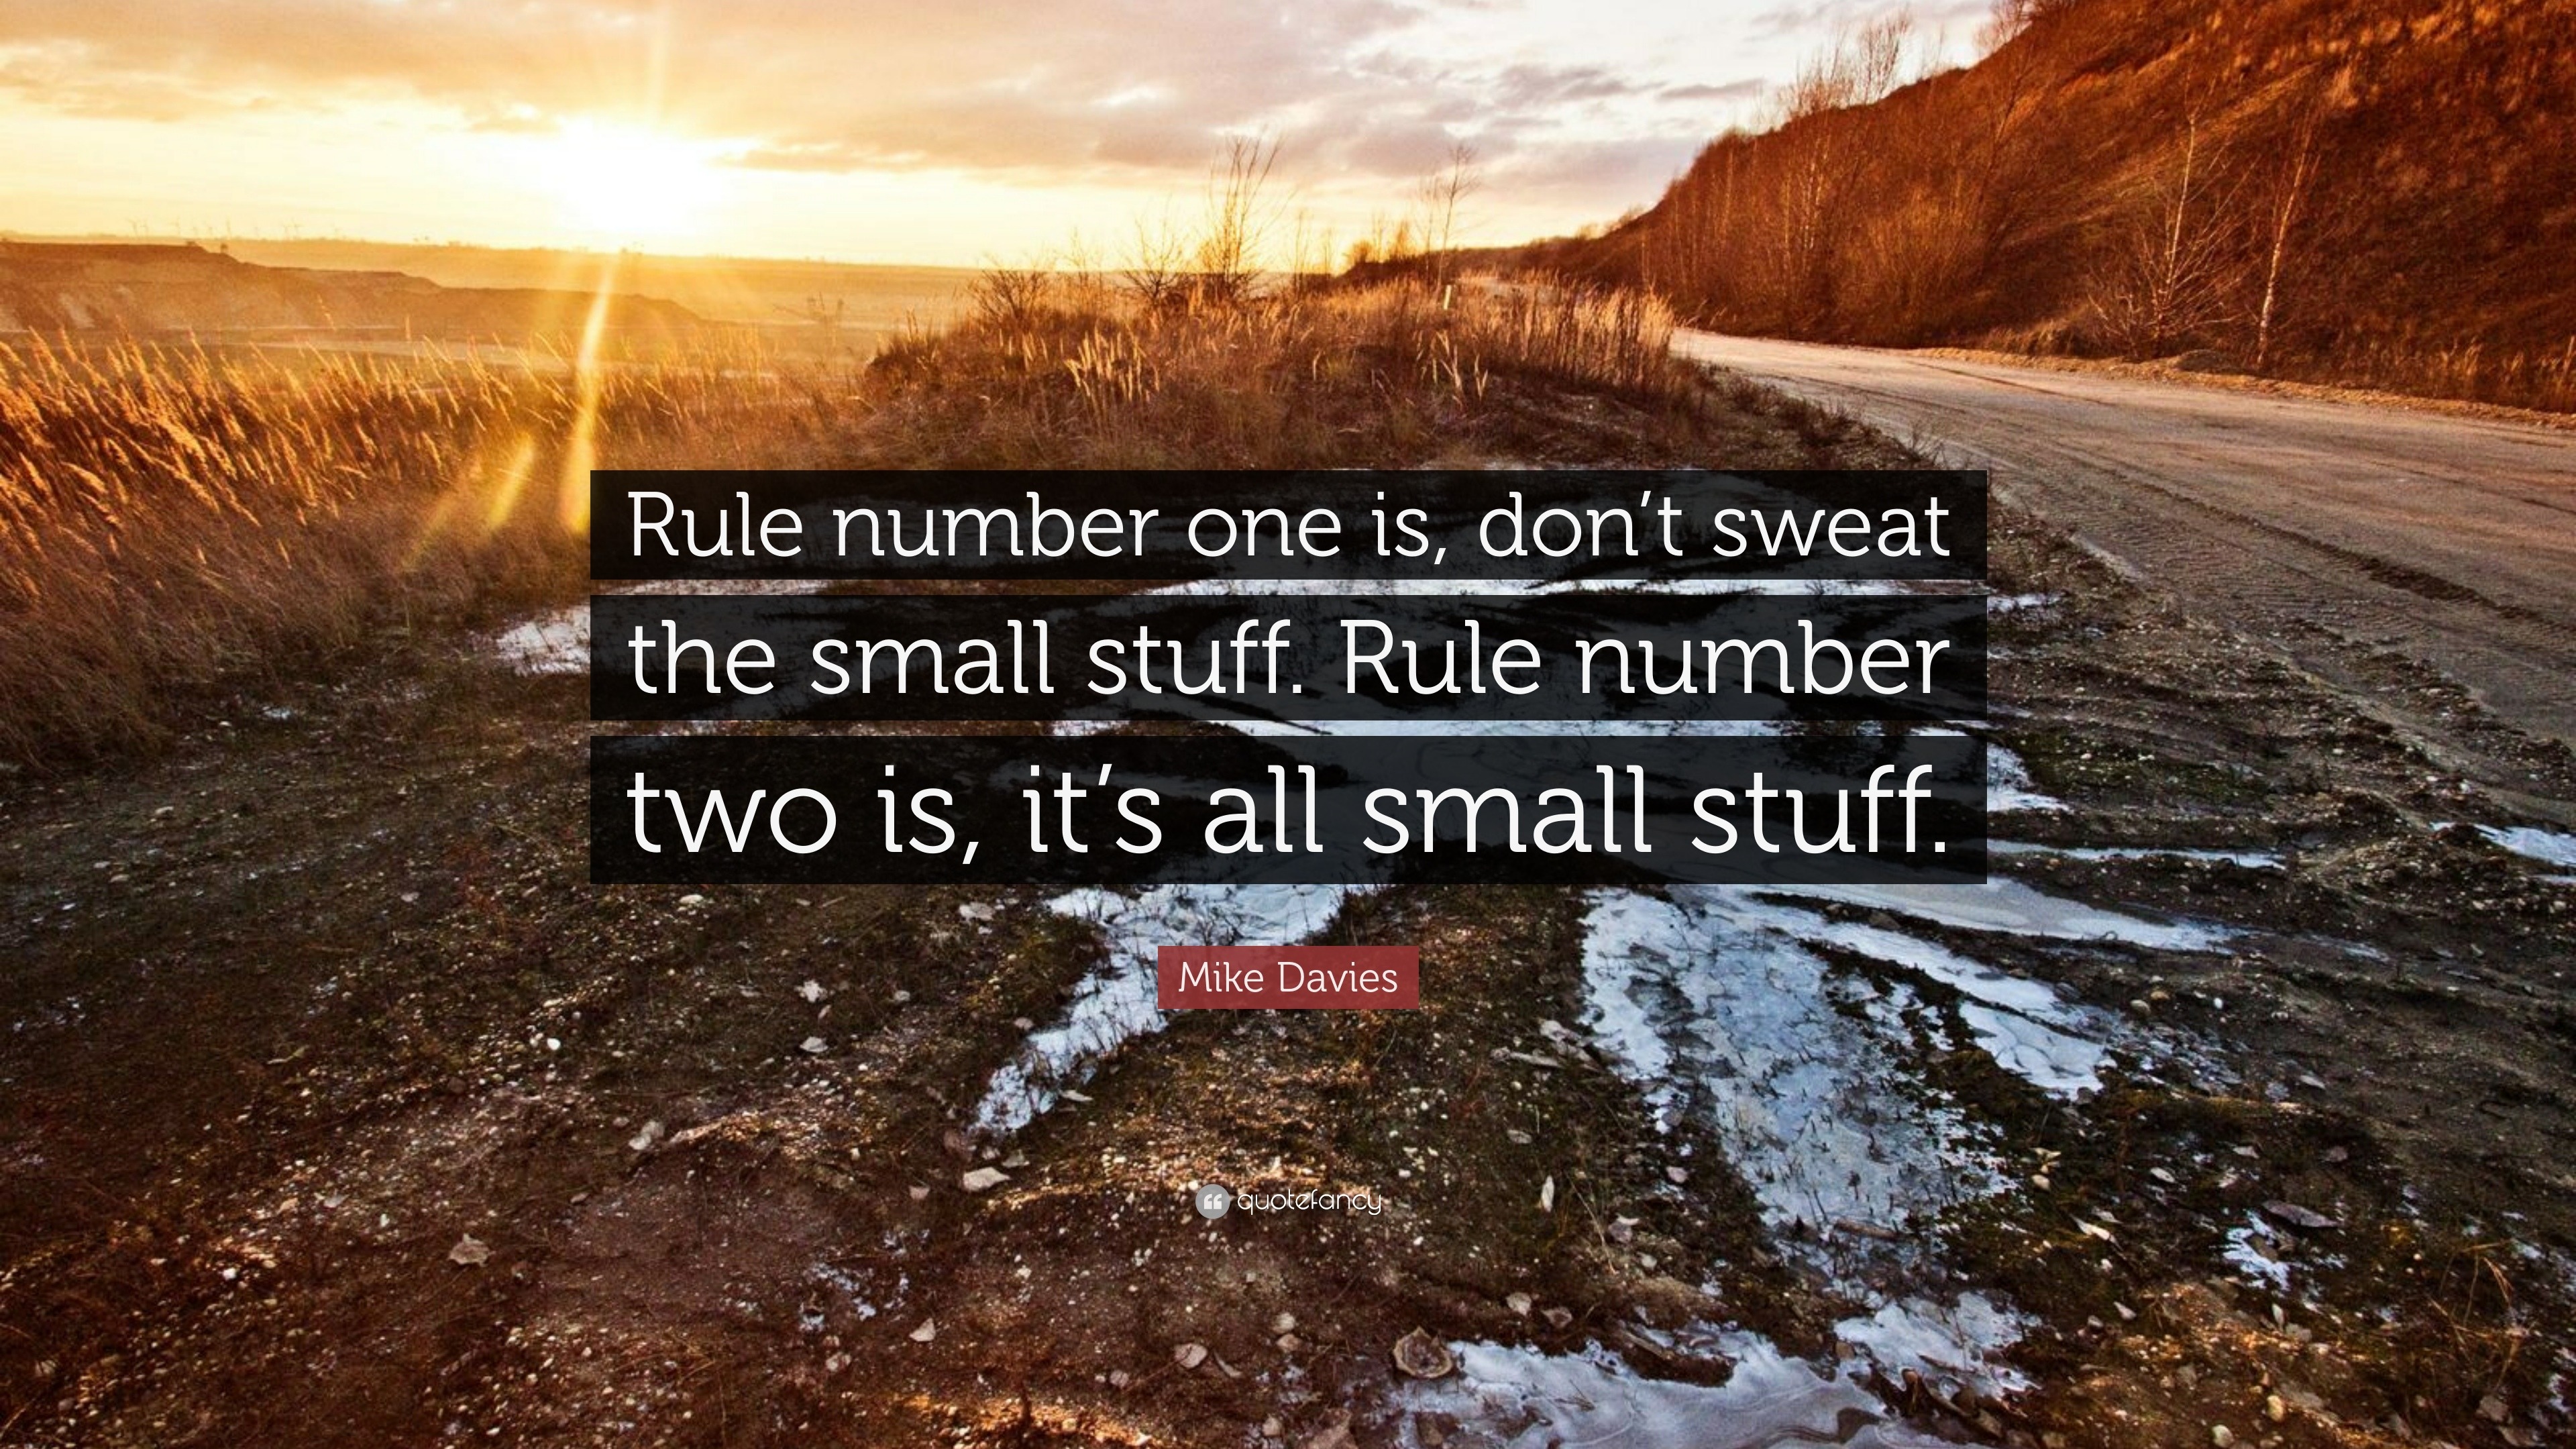 Mike Davies Quote: “Rule number one is, don’t sweat the small stuff